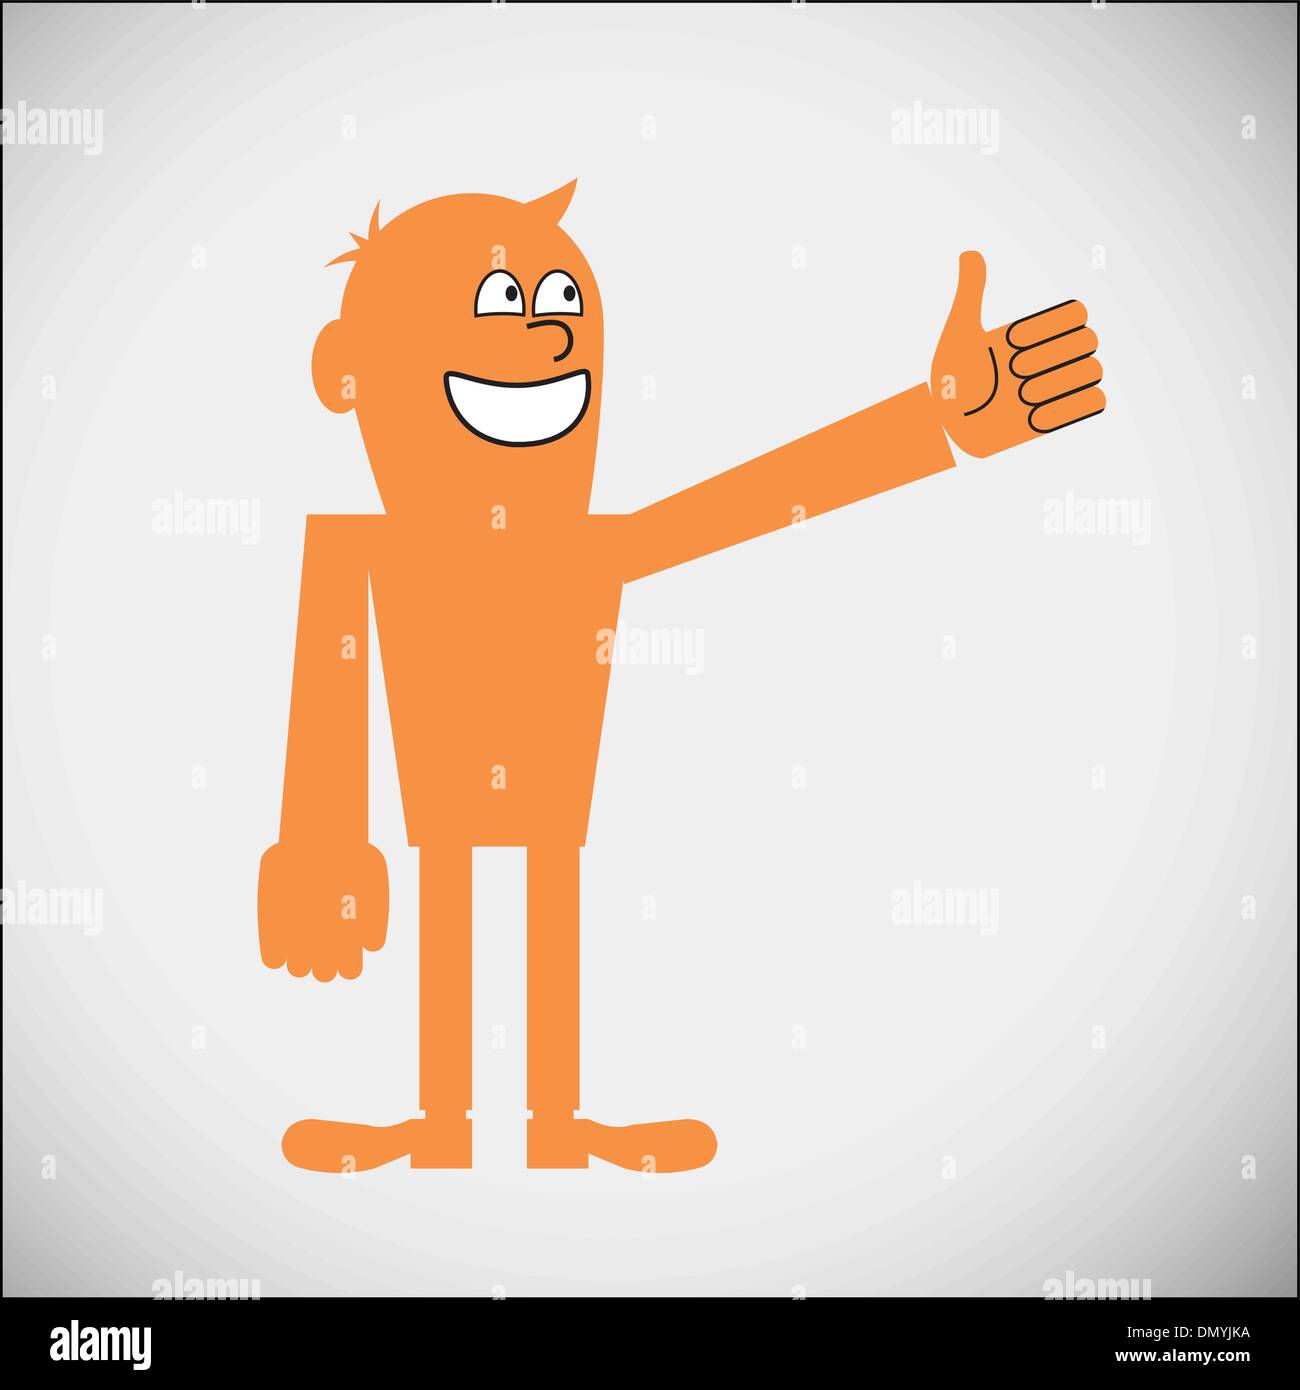 Thumbs Up Vector Art, Icons, and Graphics for Free Download